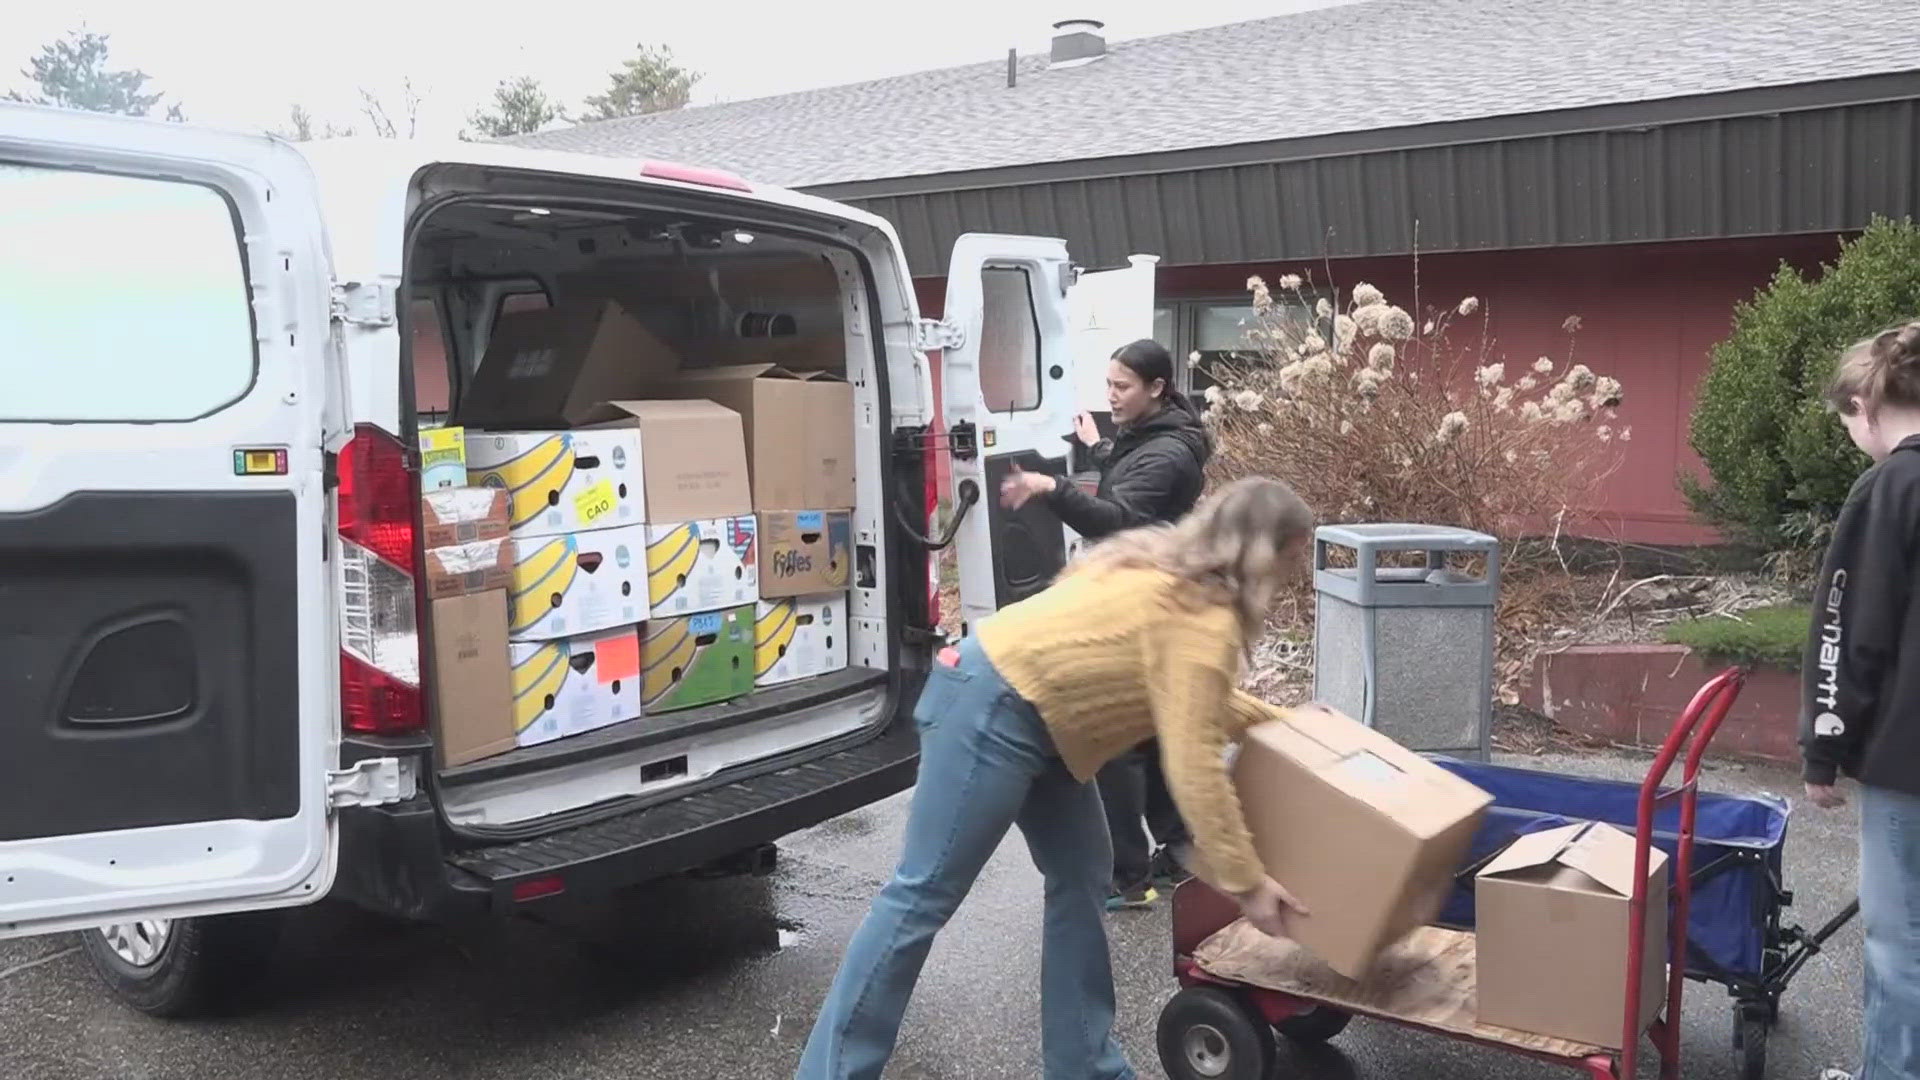 The nonprofit is led by three young women who want to make sure food pantries are stocked in schools across York County.